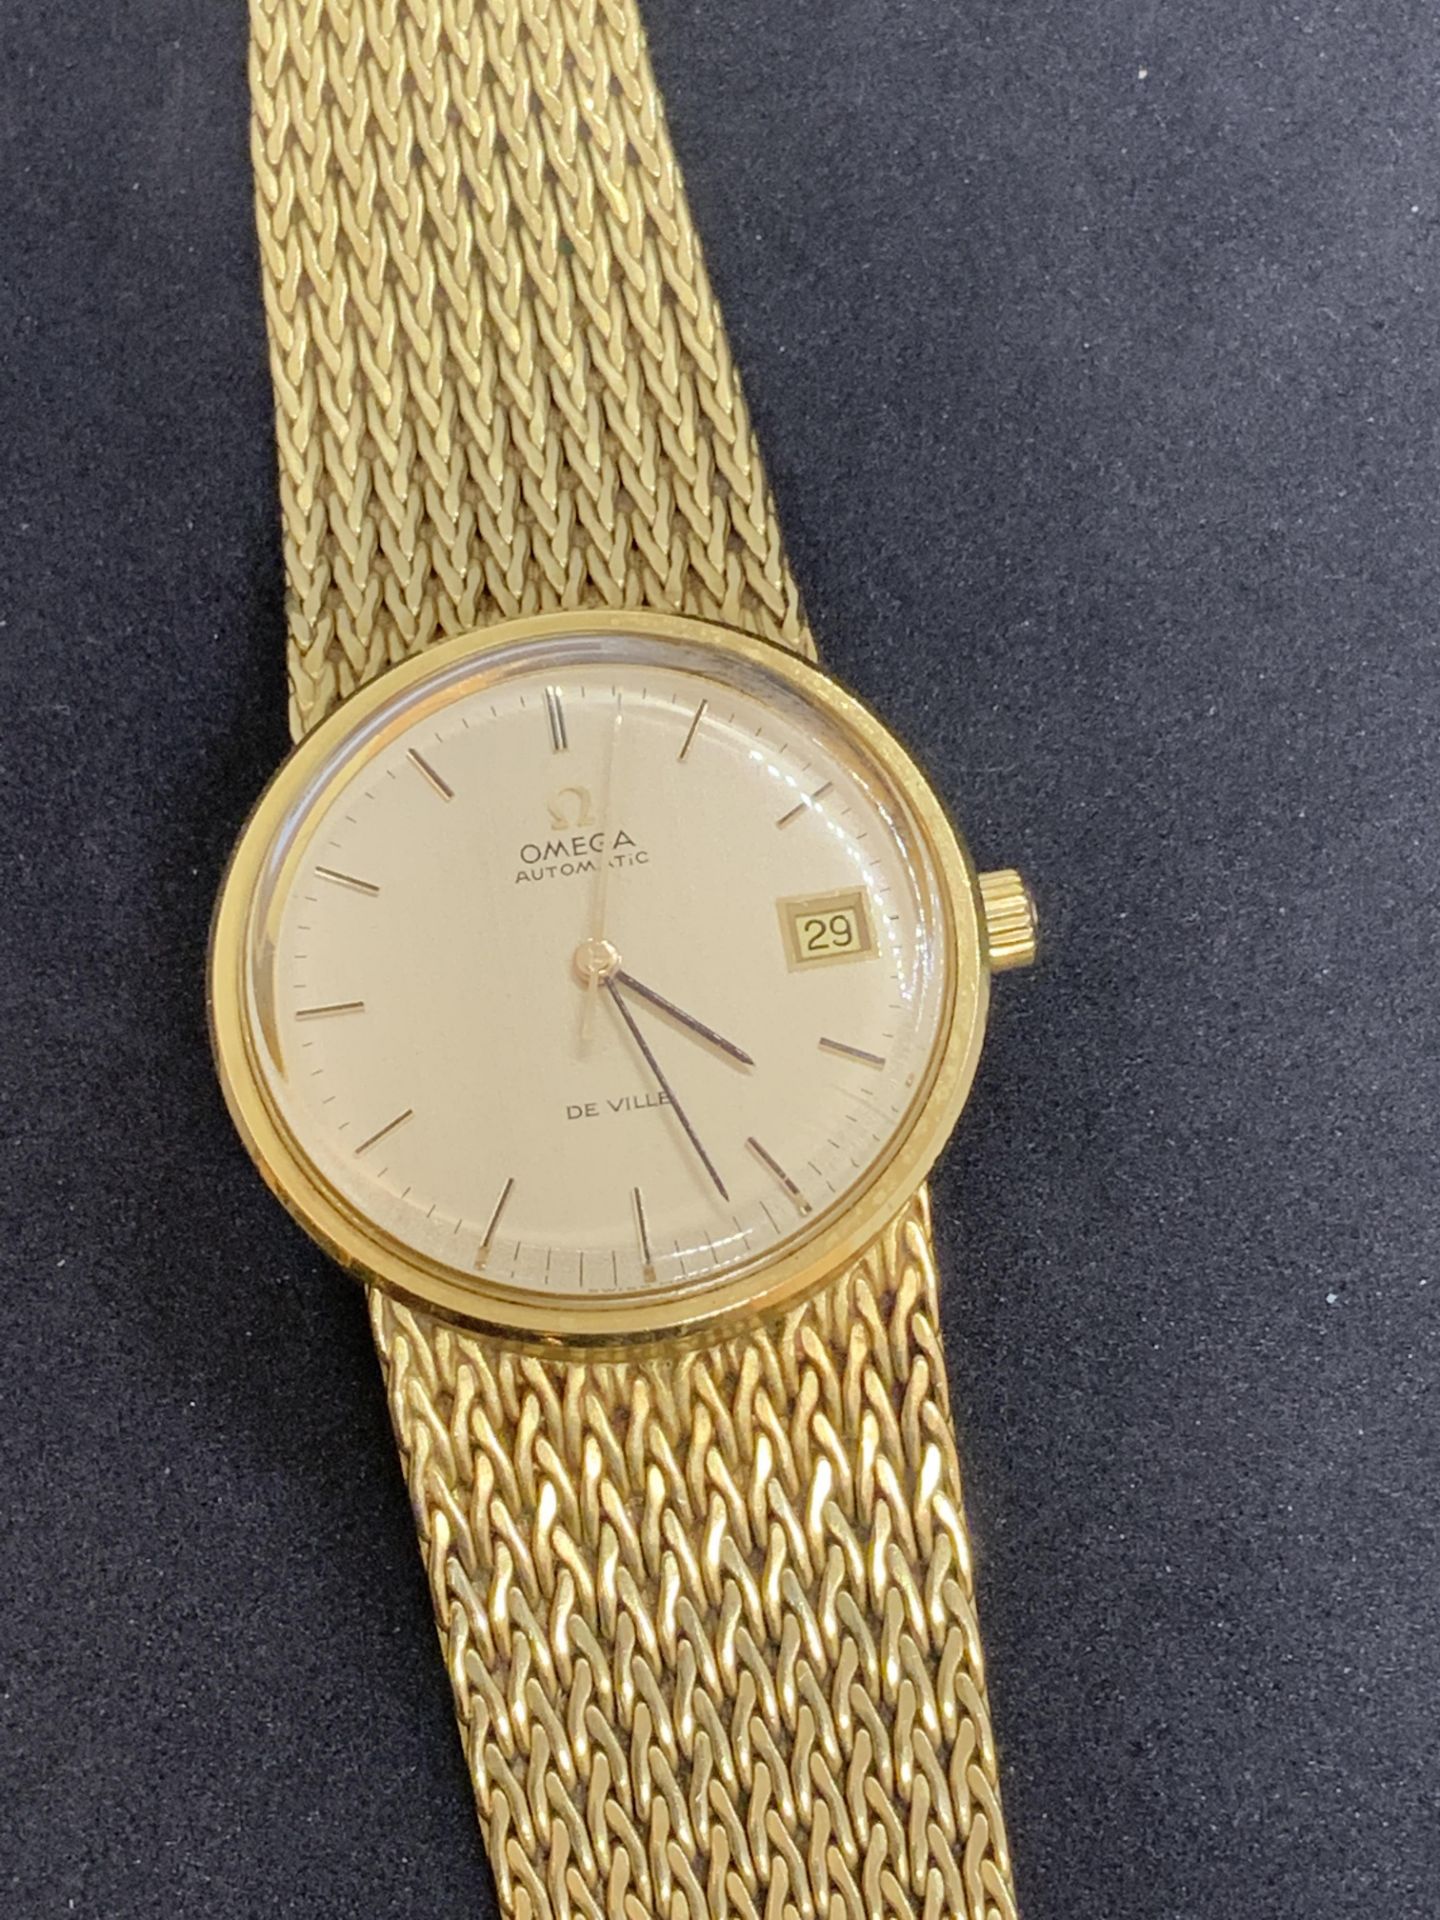 18ct GOLD OMEGA DE VILLE AUTOMATIC WATCH - 99 GRAMS - Image 6 of 8